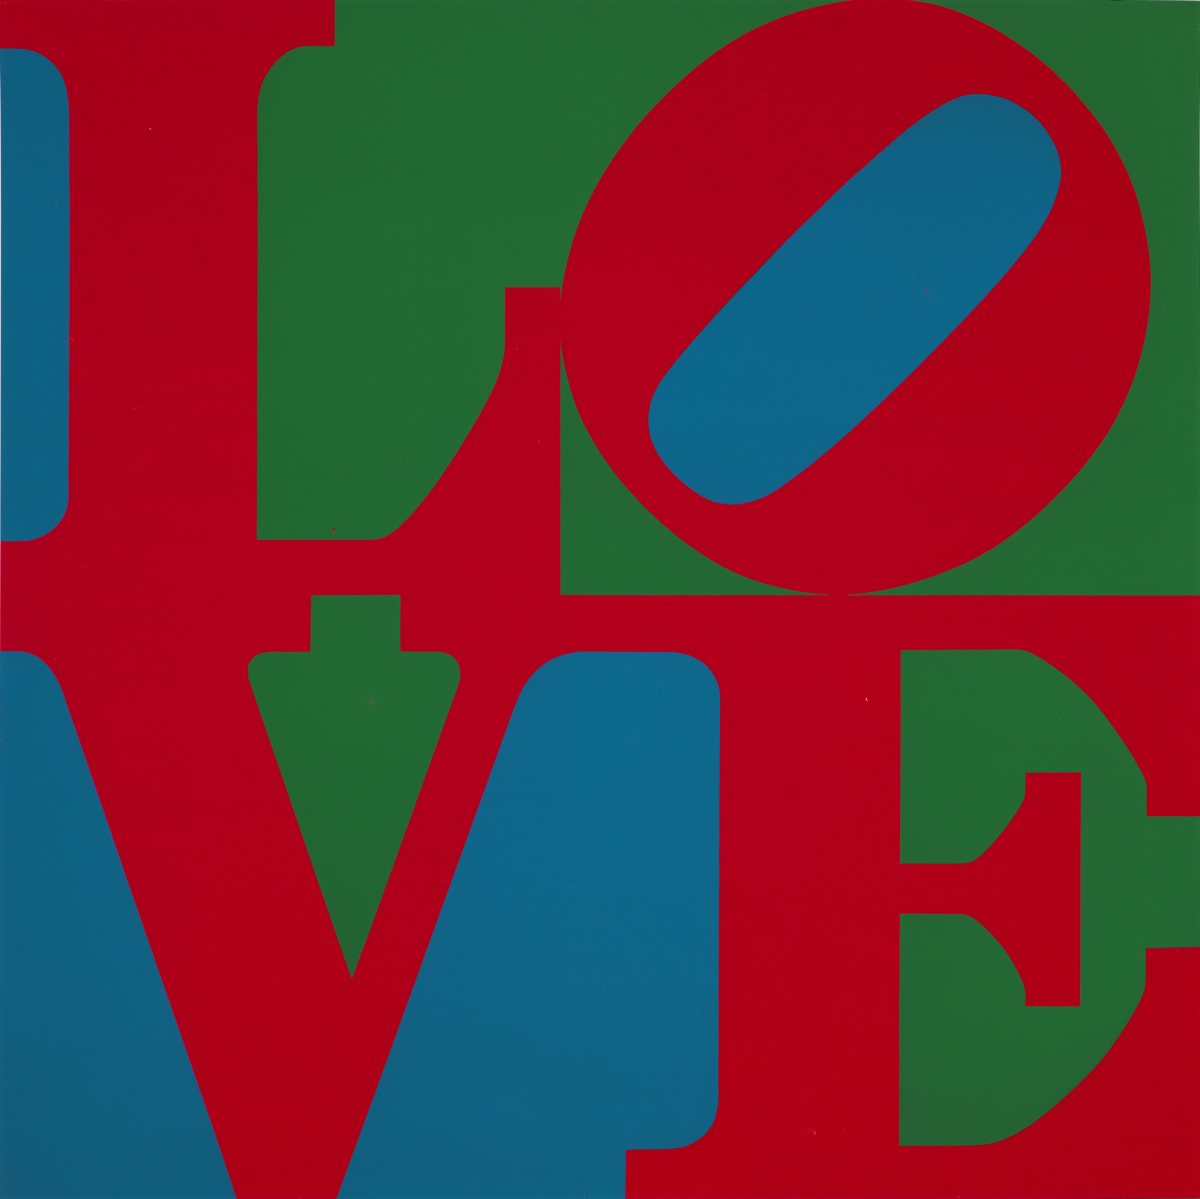 A painting of the word "LOVE" in red with green and blue background